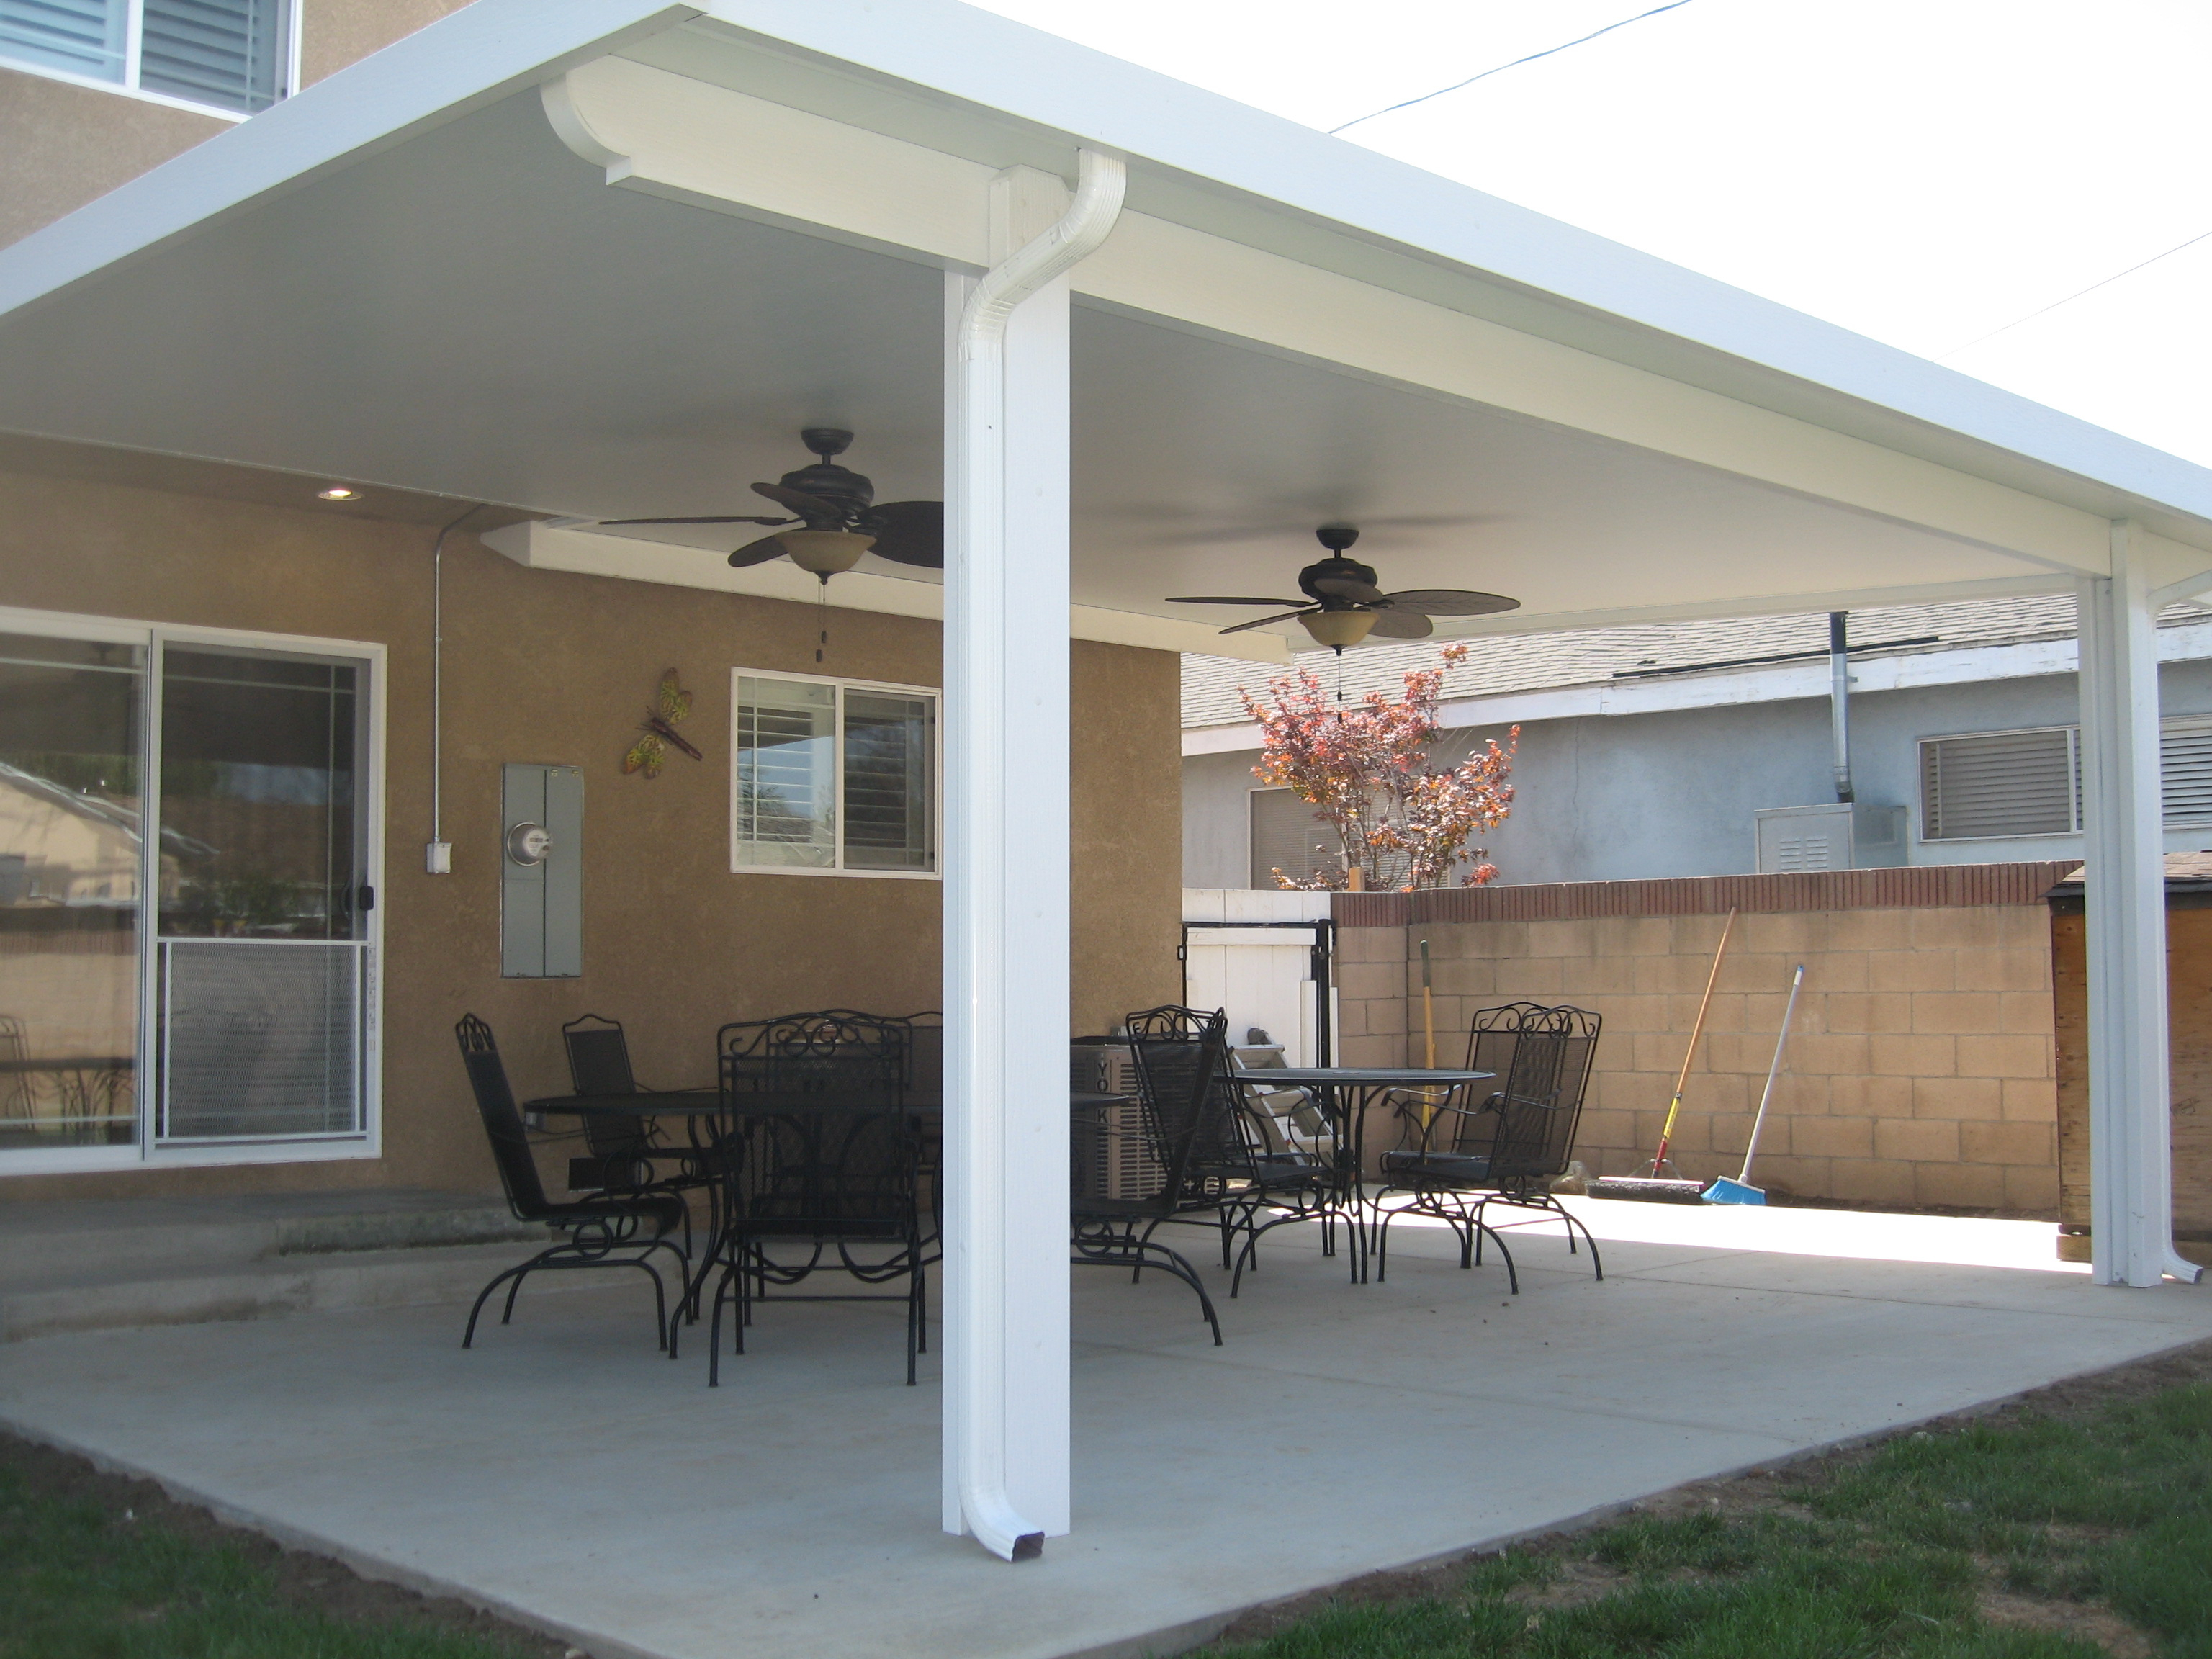 Polycarbonate Patio Covers In Los Angeles Orange County throughout size 3072 X 2304